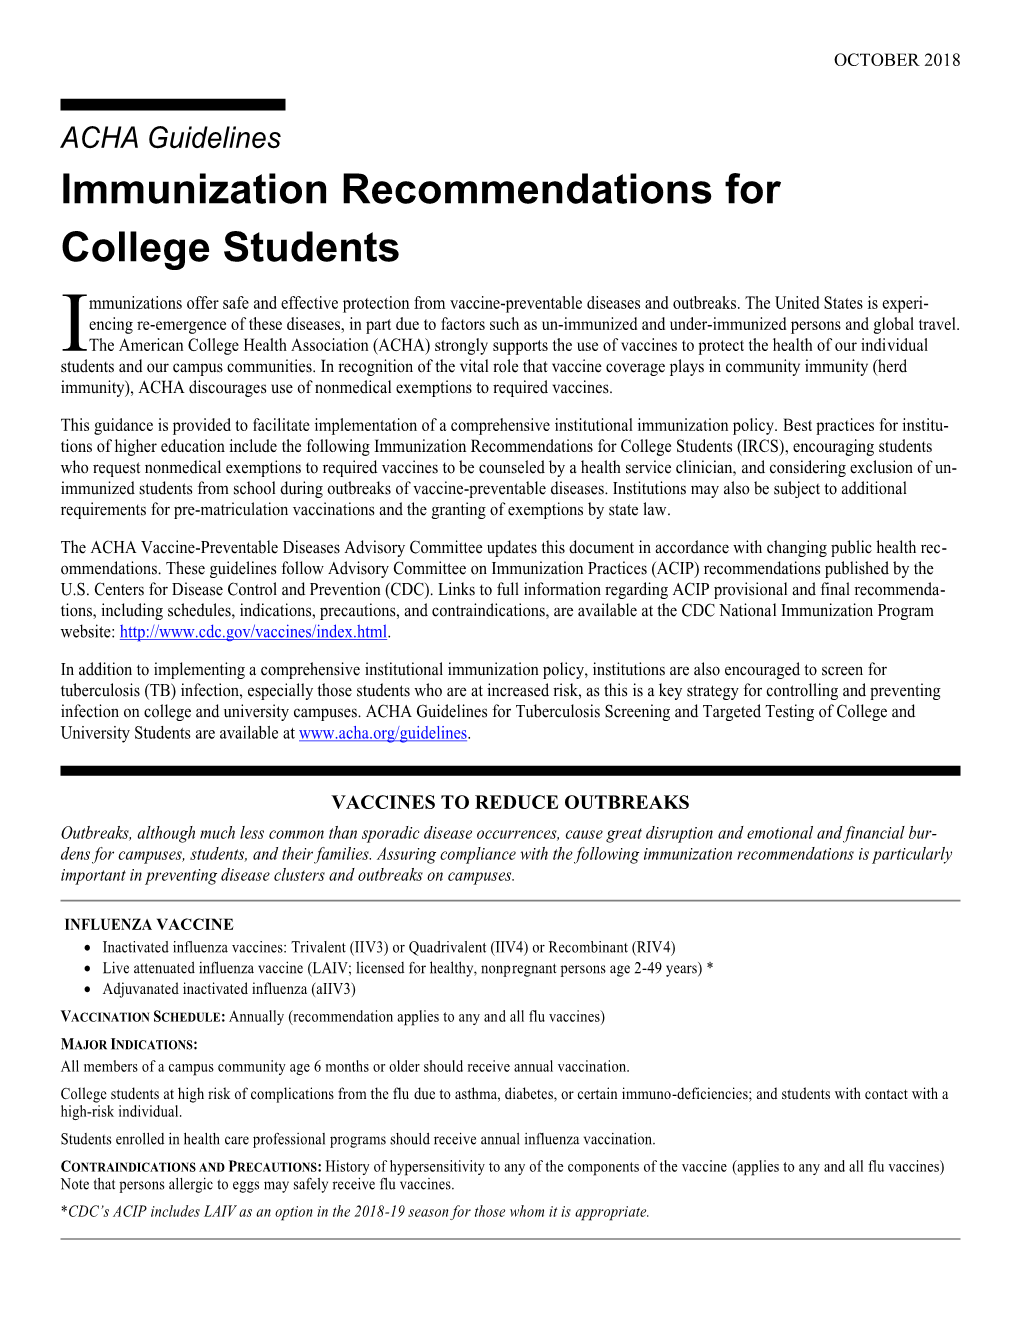 Immunization Recommendations for College Students